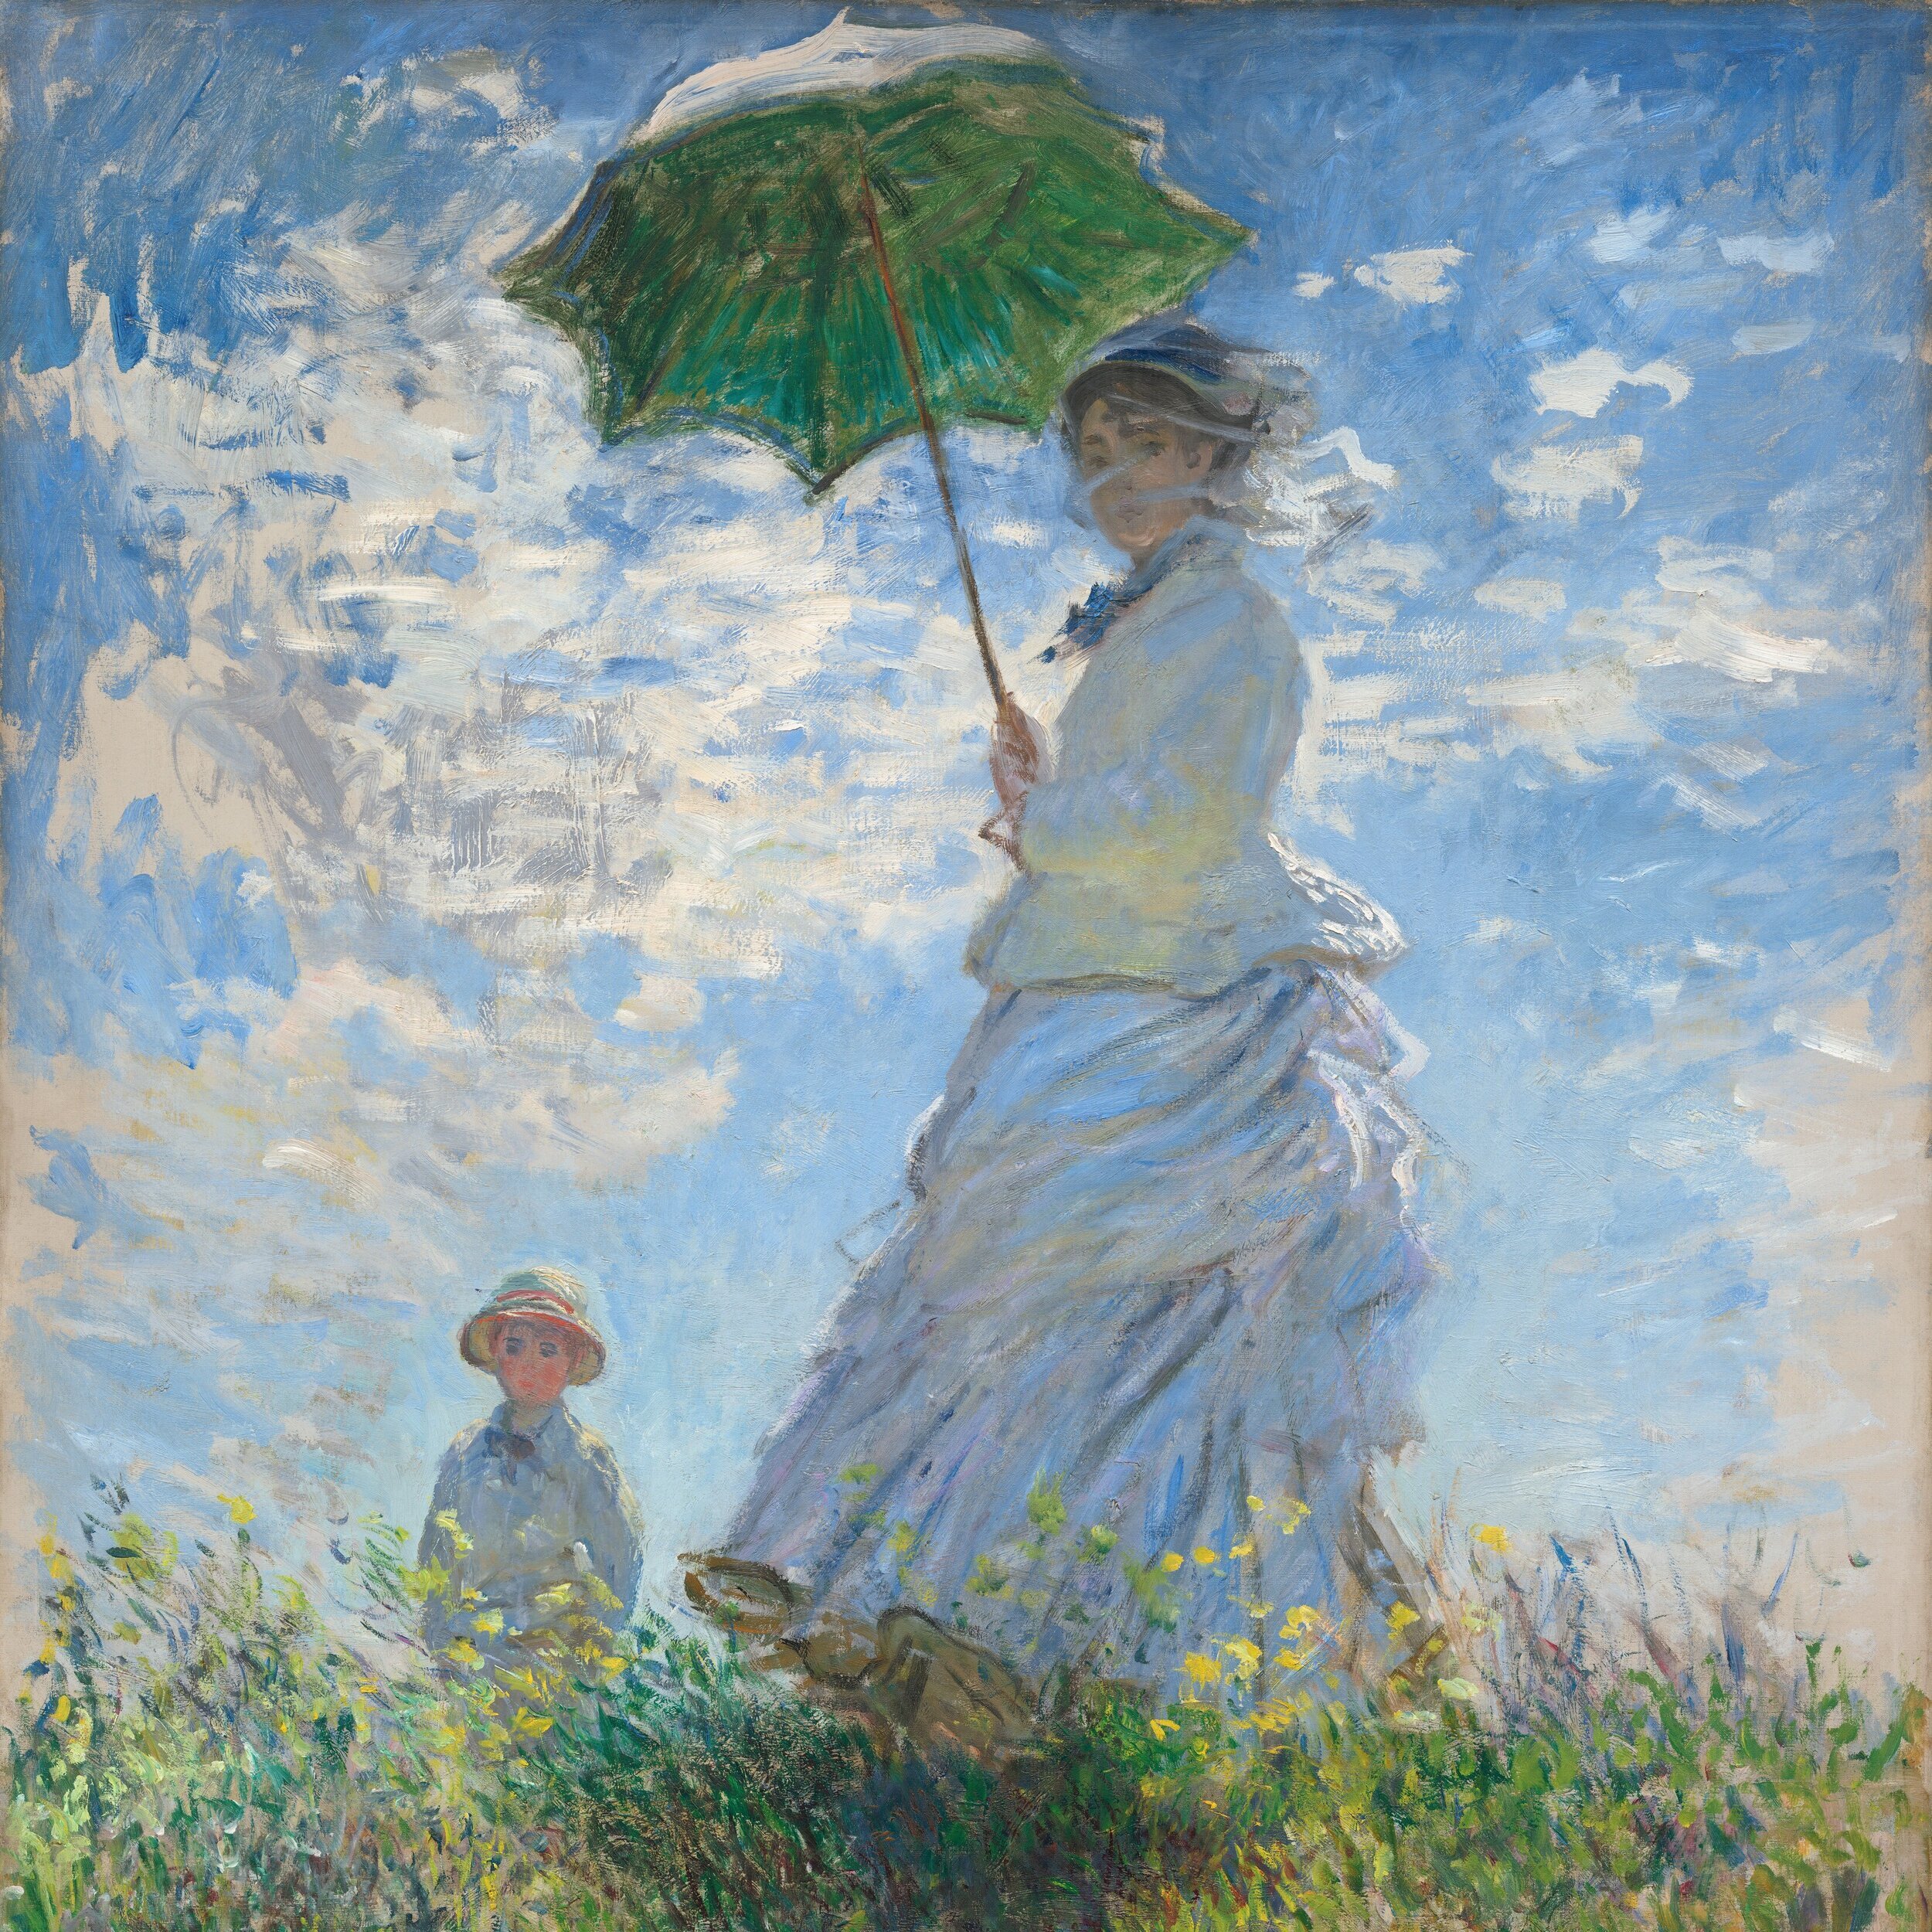 woman_with_a_parasol_-_madame_monet_and_her_son_1983.1.29.jpg